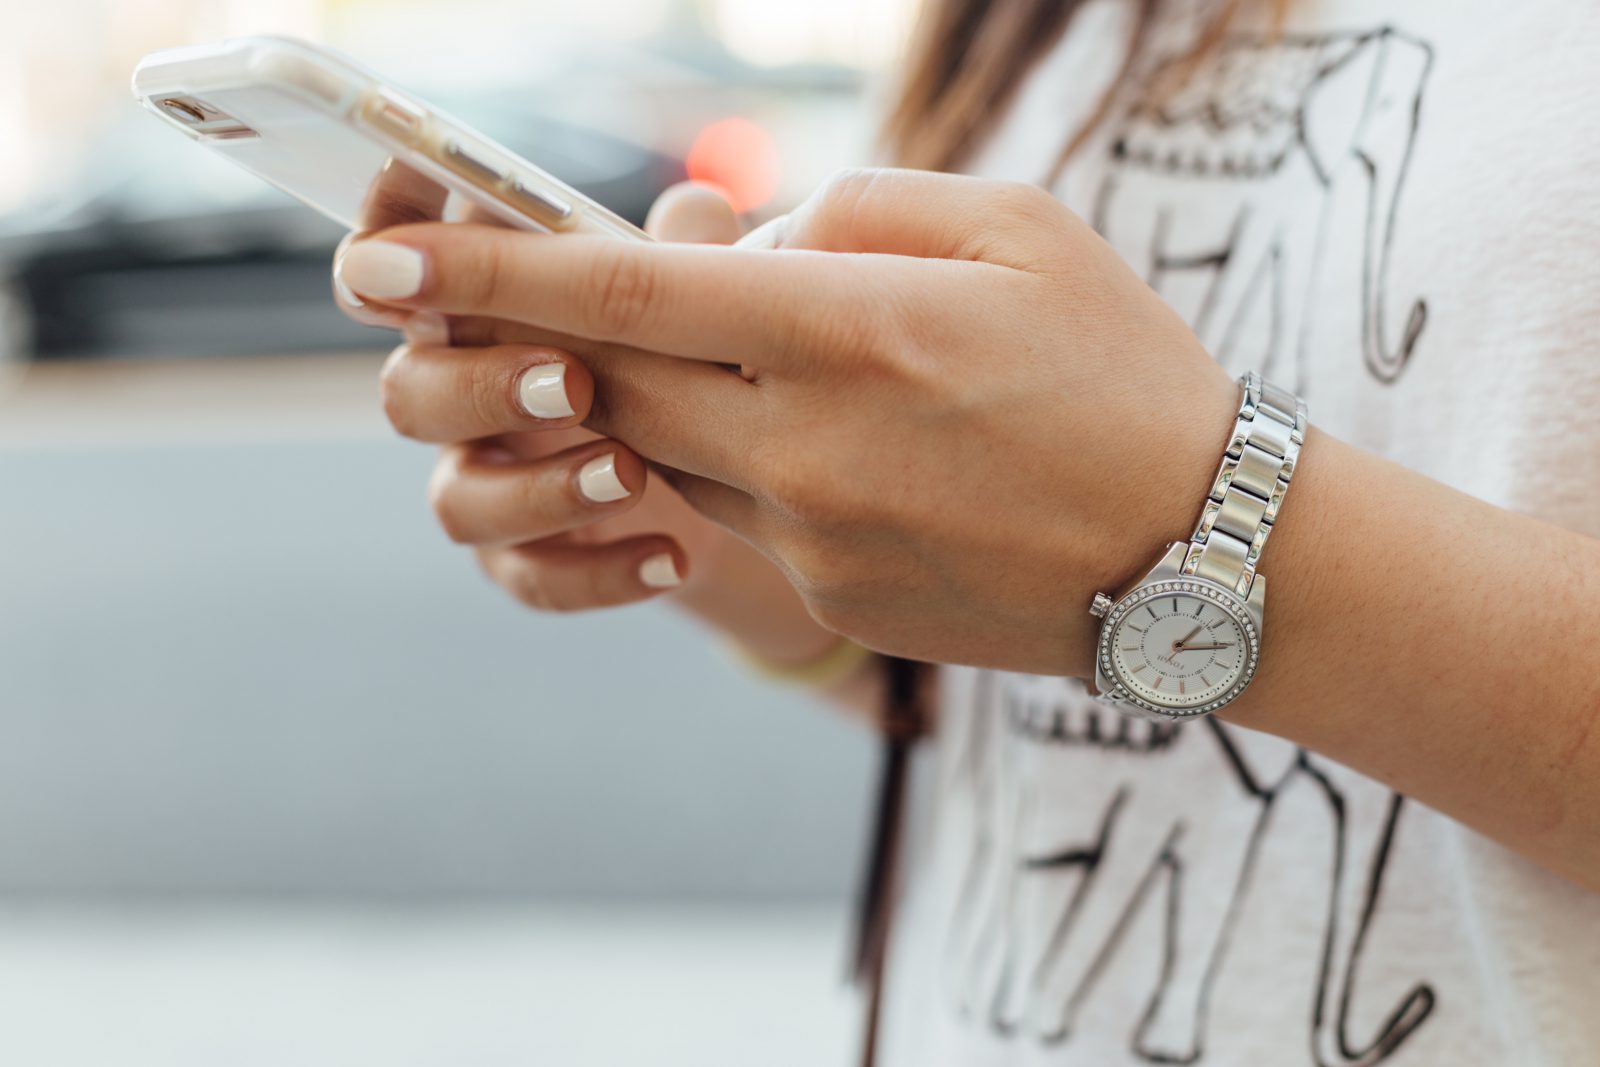 Young woman's hands holding smartphone